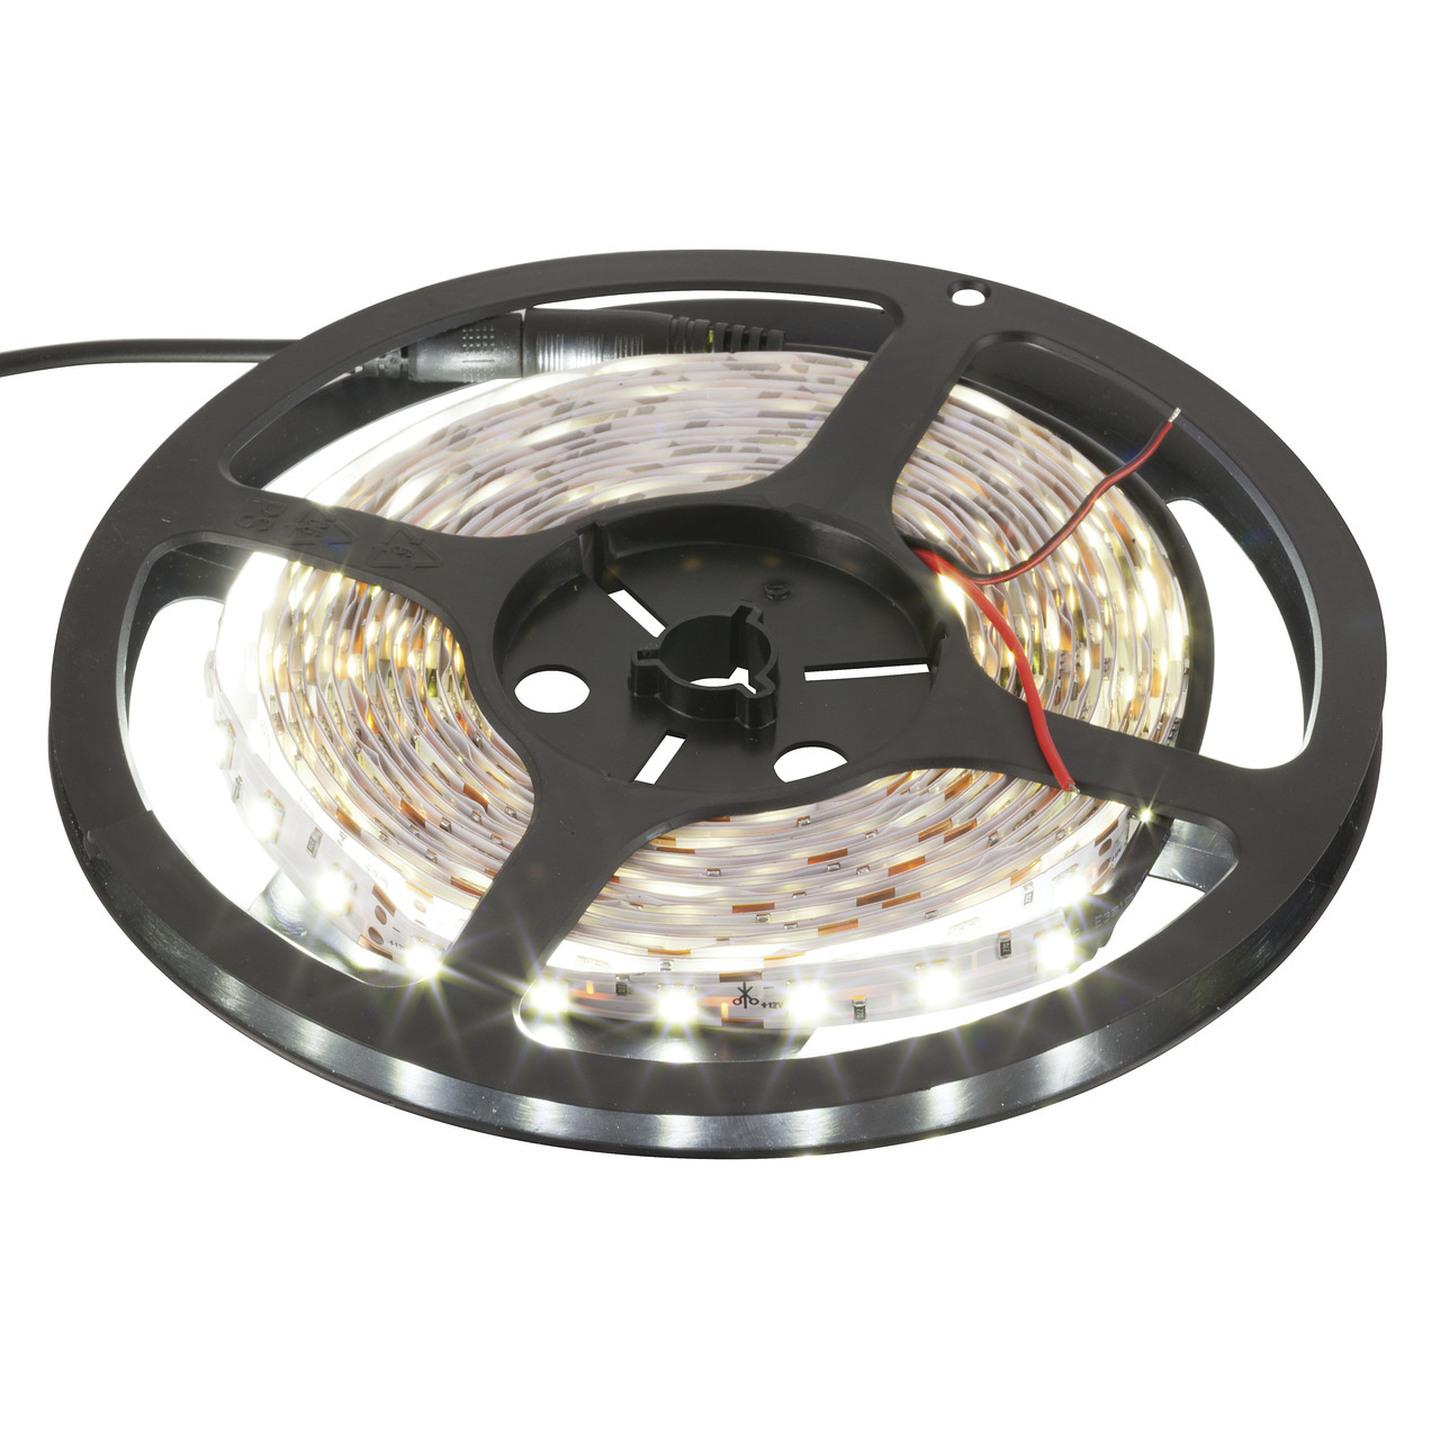 Low Cost 5m Flexible Adhesive LED Strip Lights